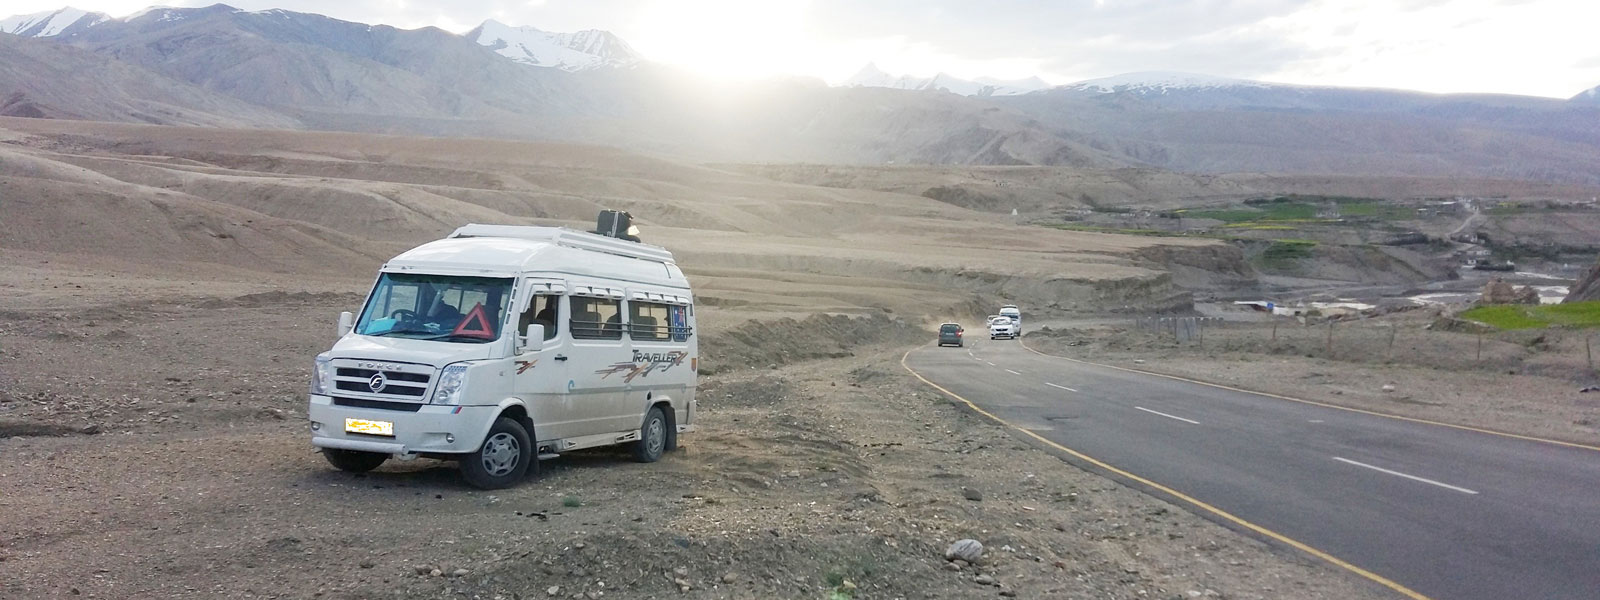 Himachal Cab Service, taxi service in himachal, himachal taxi service